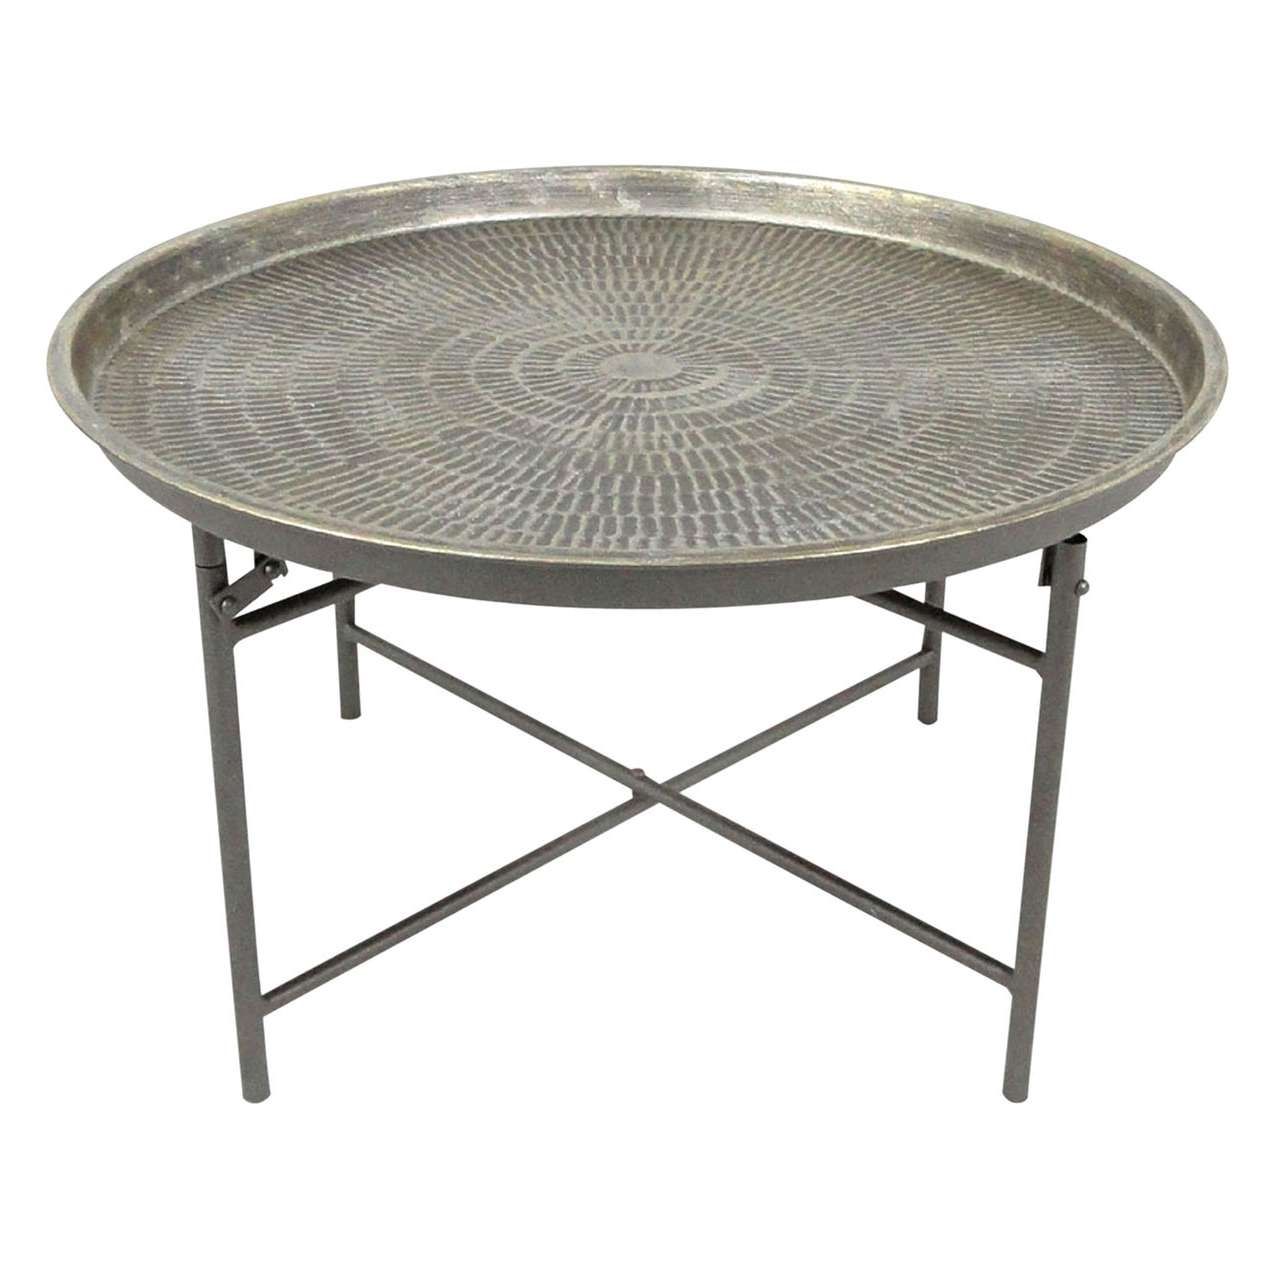 Round Metal Coffee Table Inside Well Known Round Metal Coffee Tables (Gallery 3 of 20)